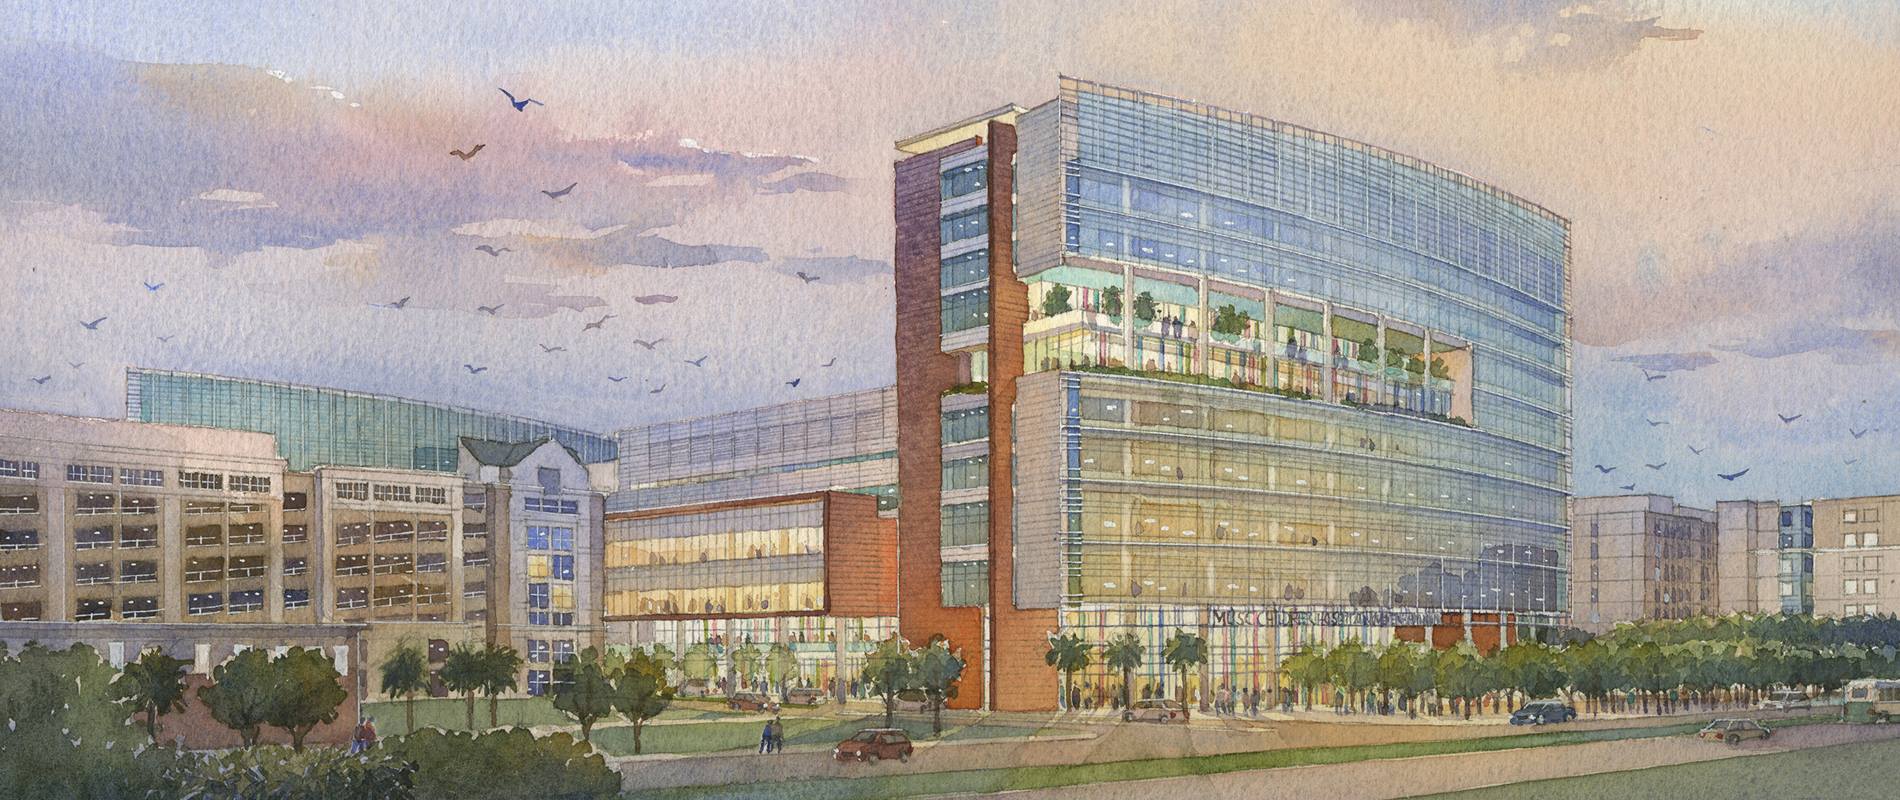 watercolor rendering of the Shawn Jenkins Childrens Hospital and Womens Pavilion project